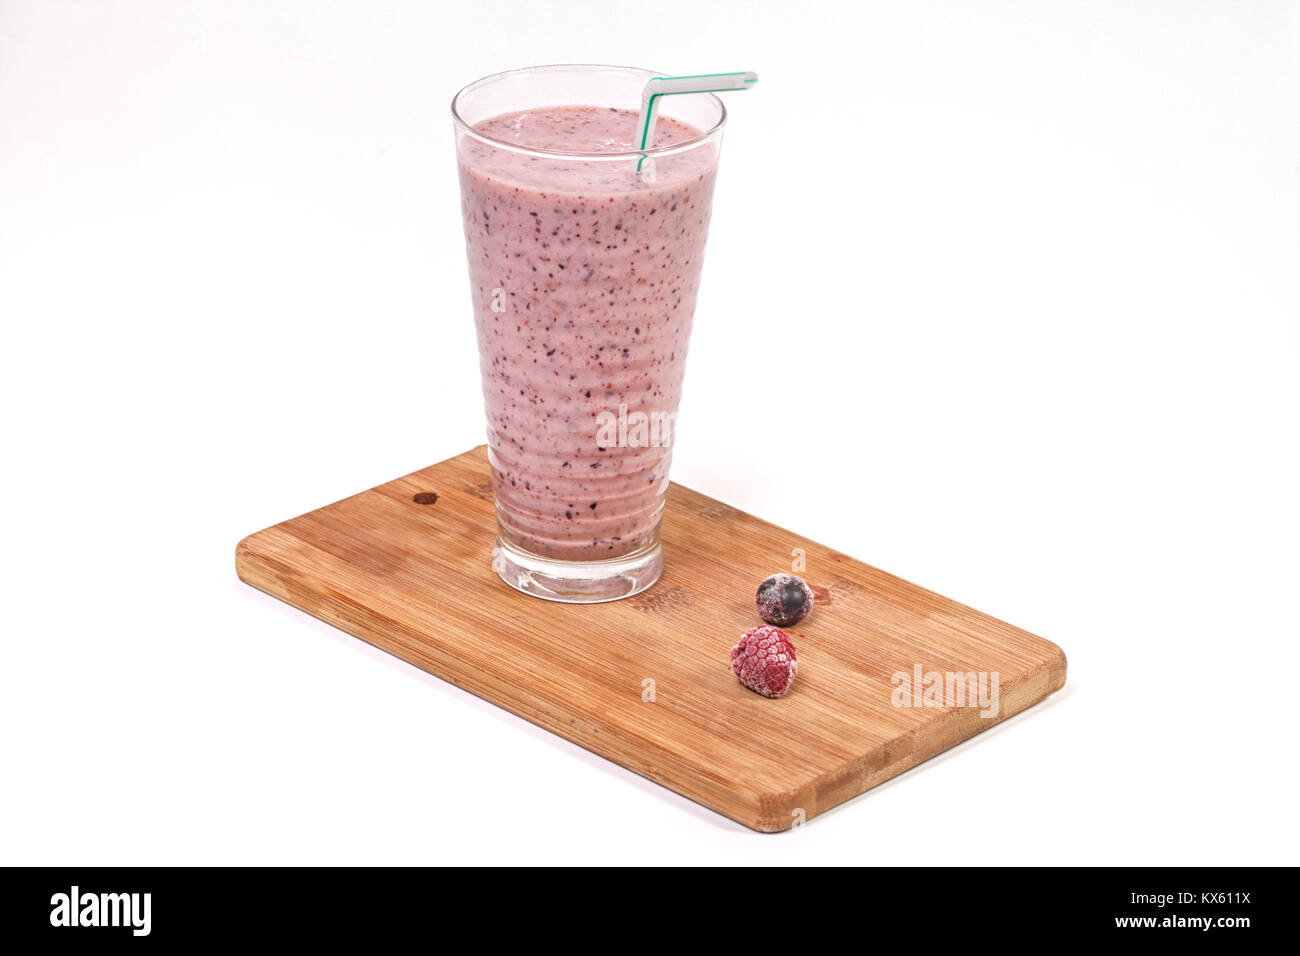 Blueberry and raspberry smoothie on wooden plate Stock Photo